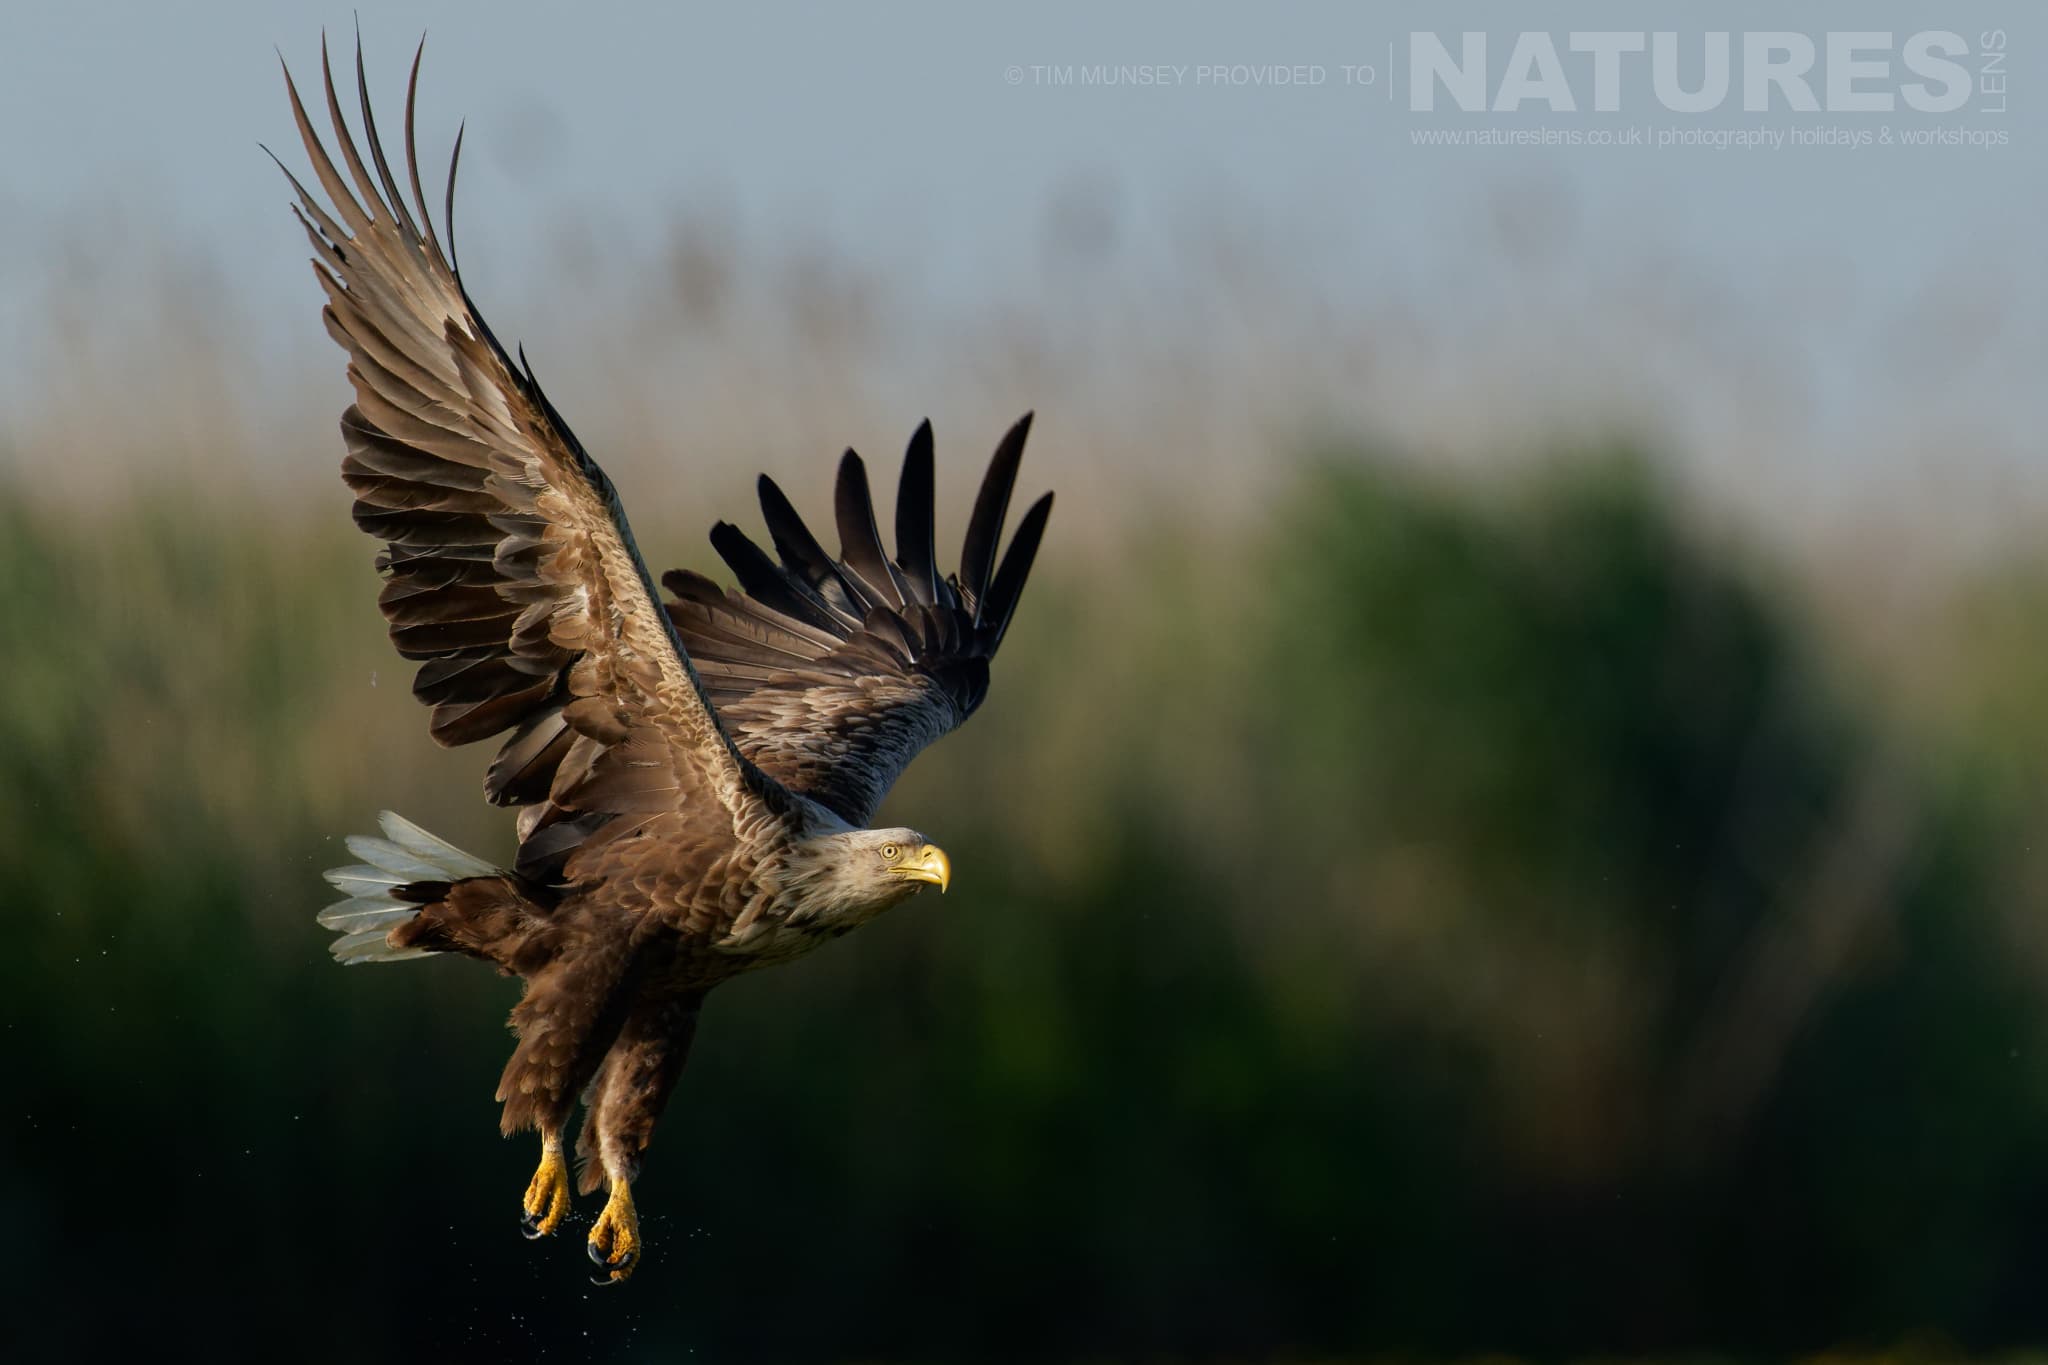 A White Tailed Eagle In Flight One Of The Species That Features On The Natureslens Birds Of The Danube Delta Photography Holiday